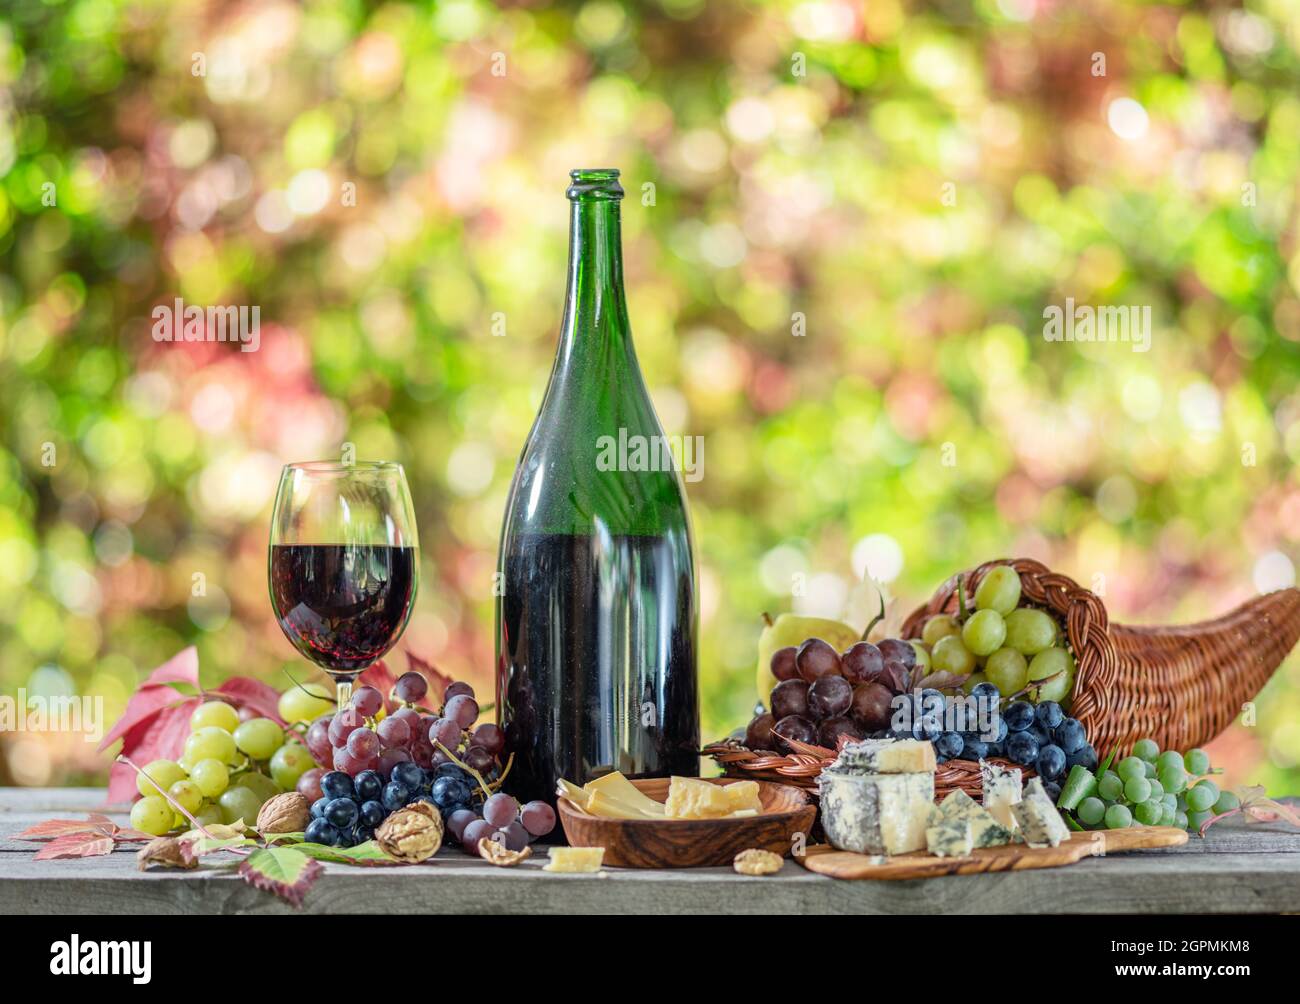 Grapes, bottle of wine and different cheeses on country wooden table and blurred colorful autumn background. Variety of products as the symbol of autu Stock Photo